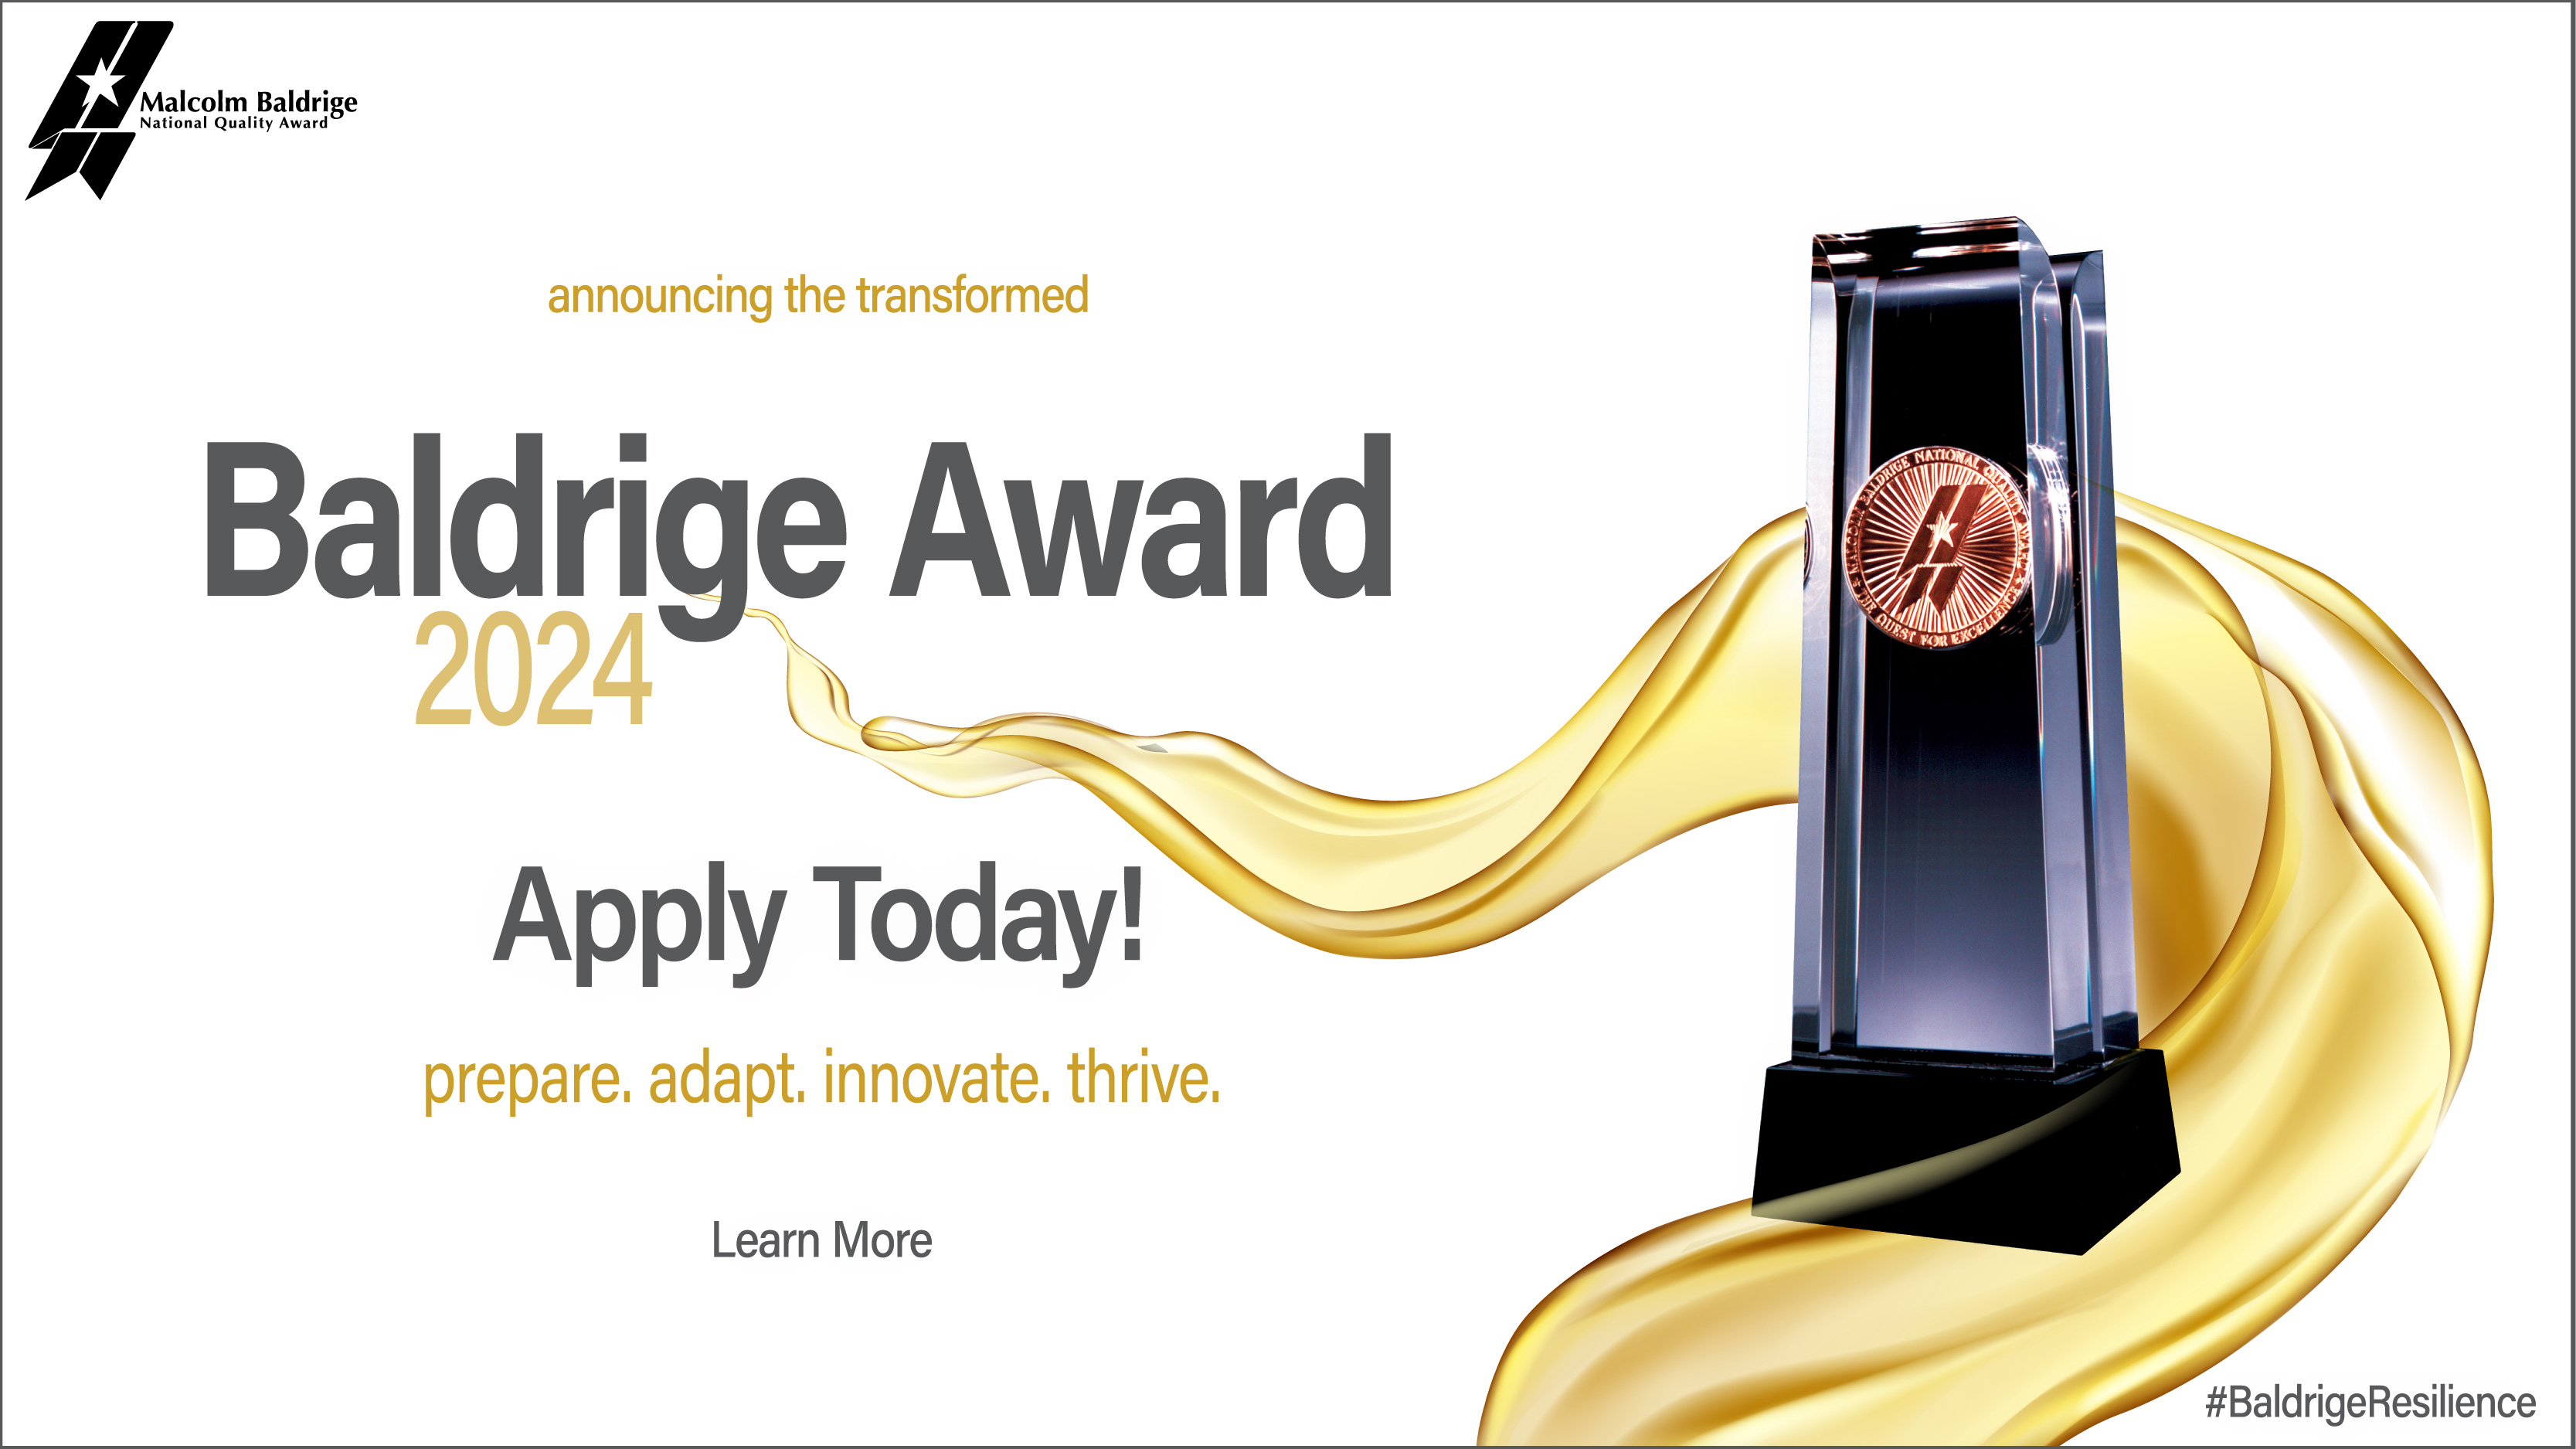 announcing the transformed 2024 Baldrige Award Apply Today! Learn More prepare. adapt. innovate. thrive.  #BaldrigeResilience